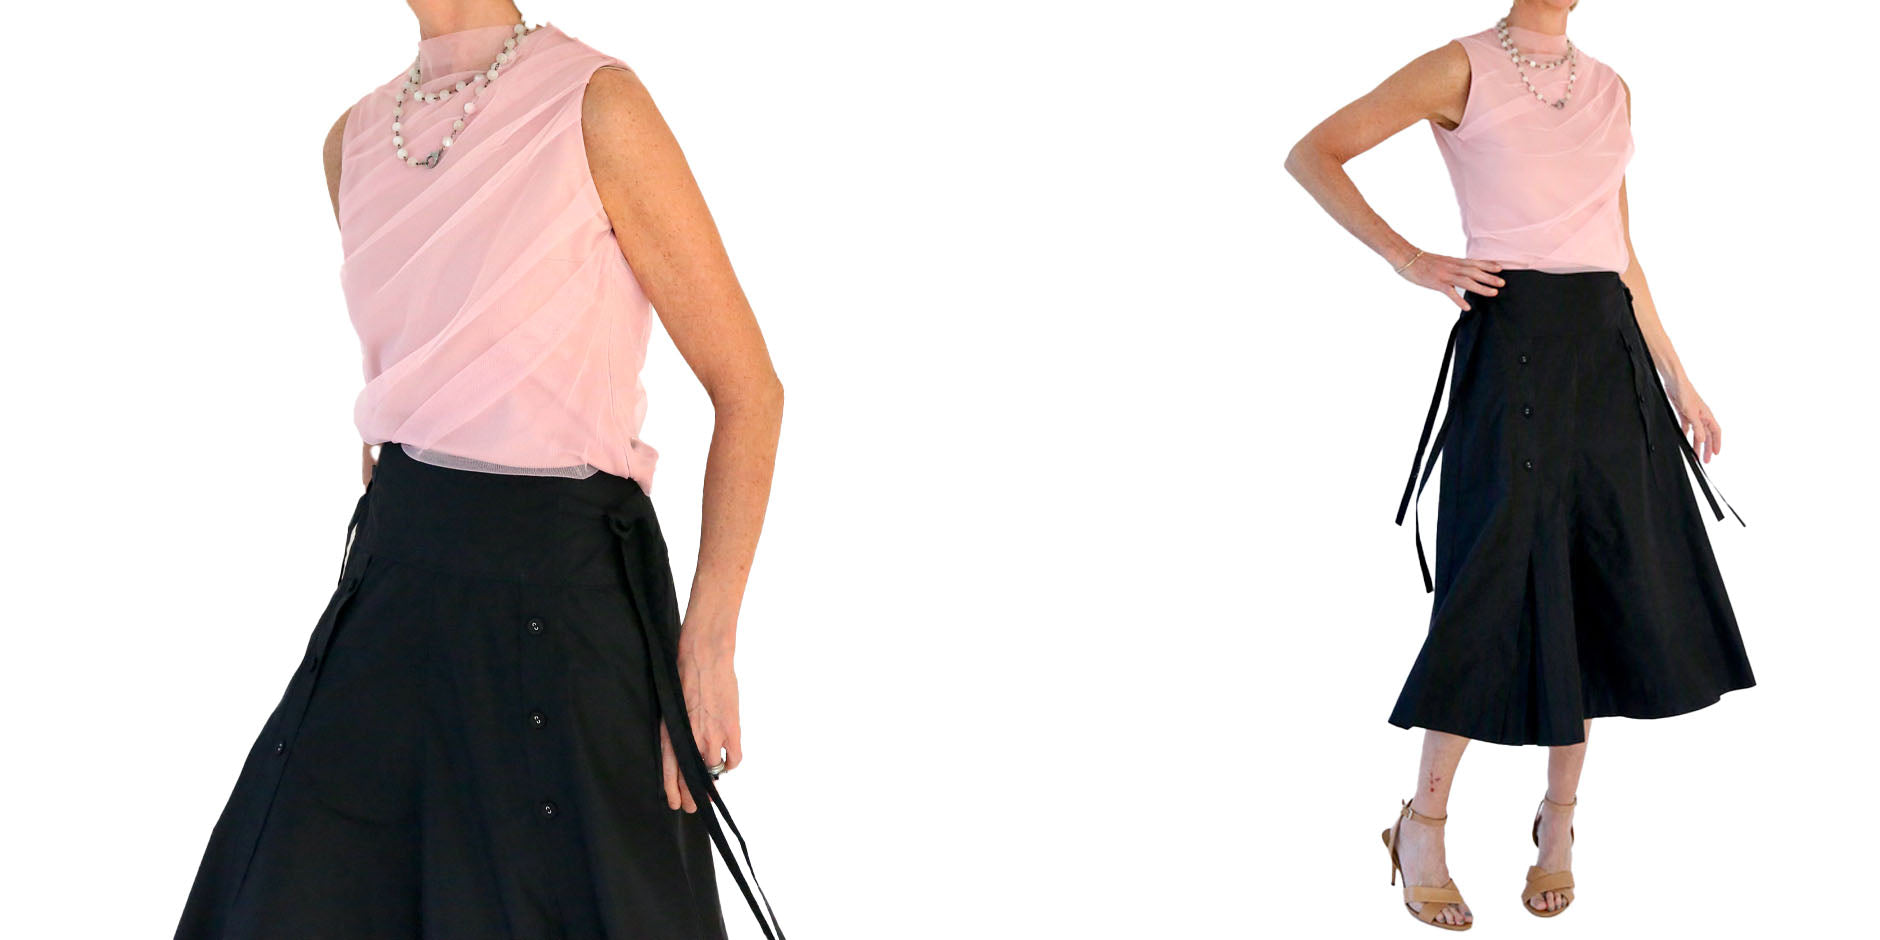 dorothee schumacher tulle top, 3.1 phillip lim skirt, the woods necklace